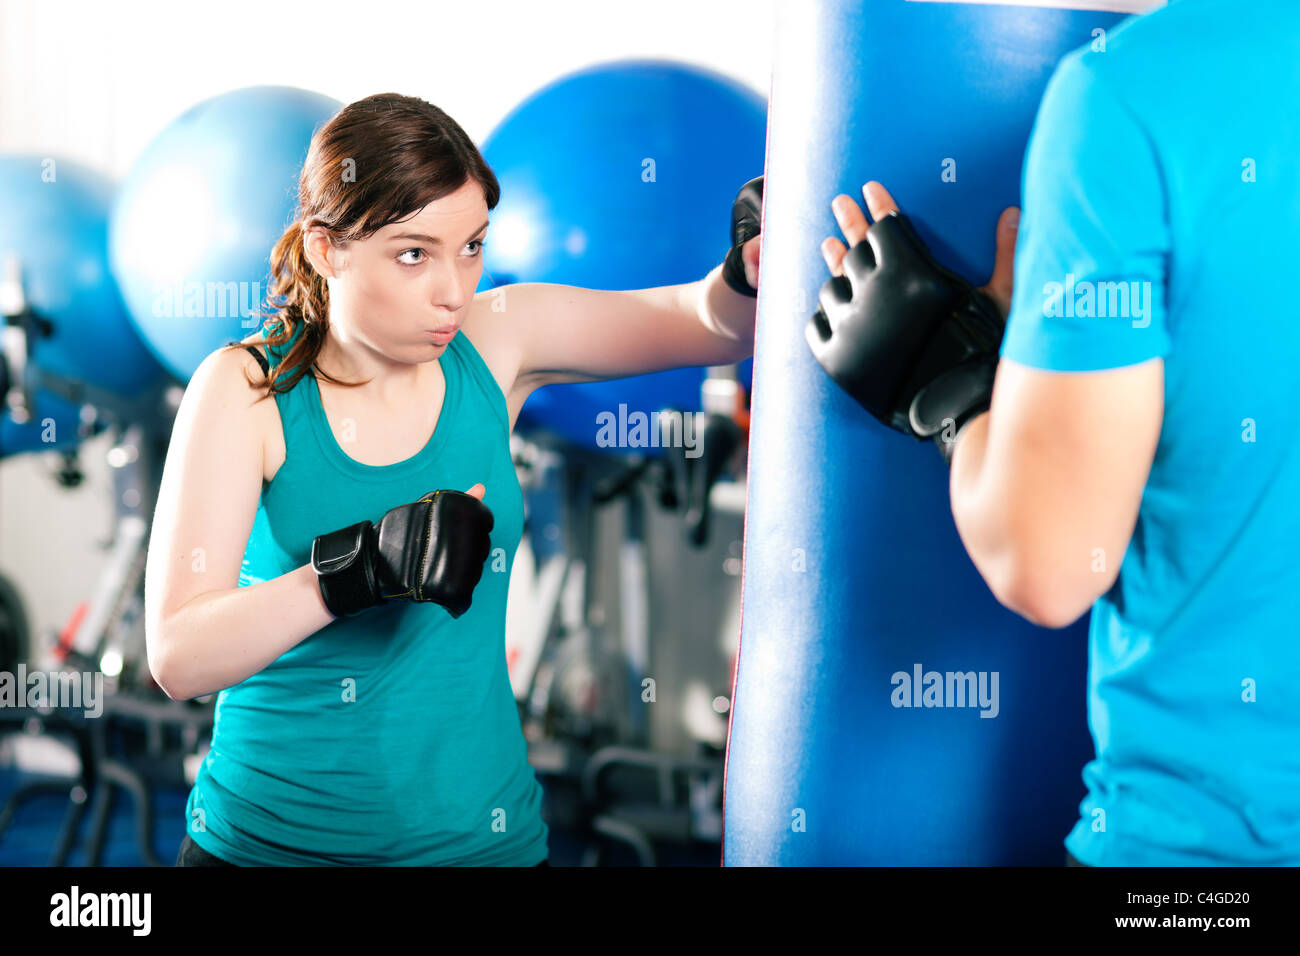 Woman Boxer hitting the sandbag, her trainer is assisting Stock Photo